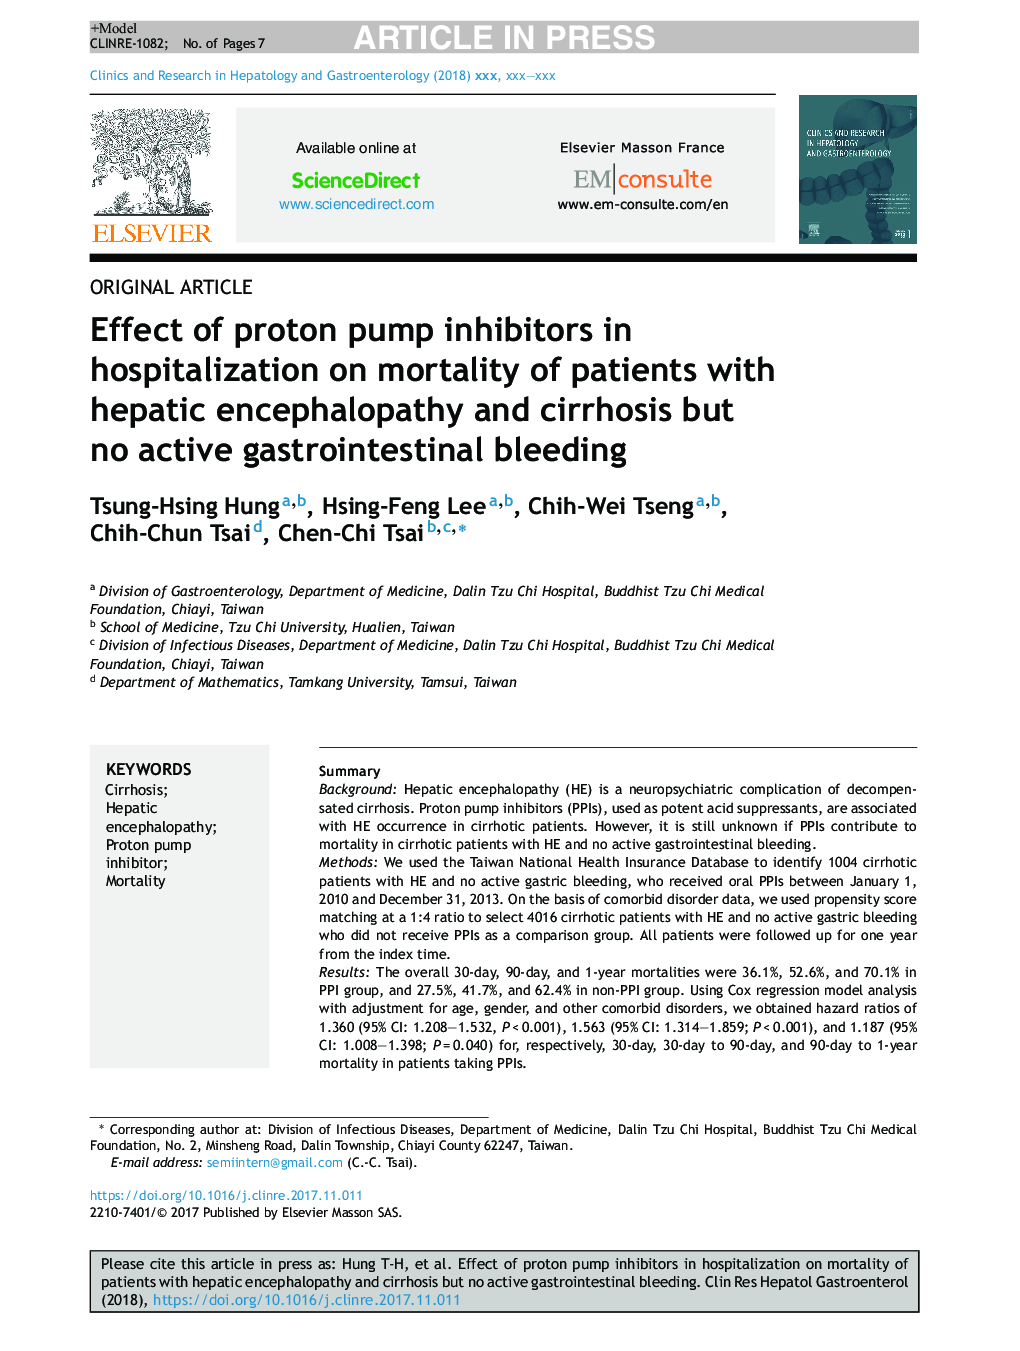 Effect of proton pump inhibitors in hospitalization on mortality of patients with hepatic encephalopathy and cirrhosis but no active gastrointestinal bleeding